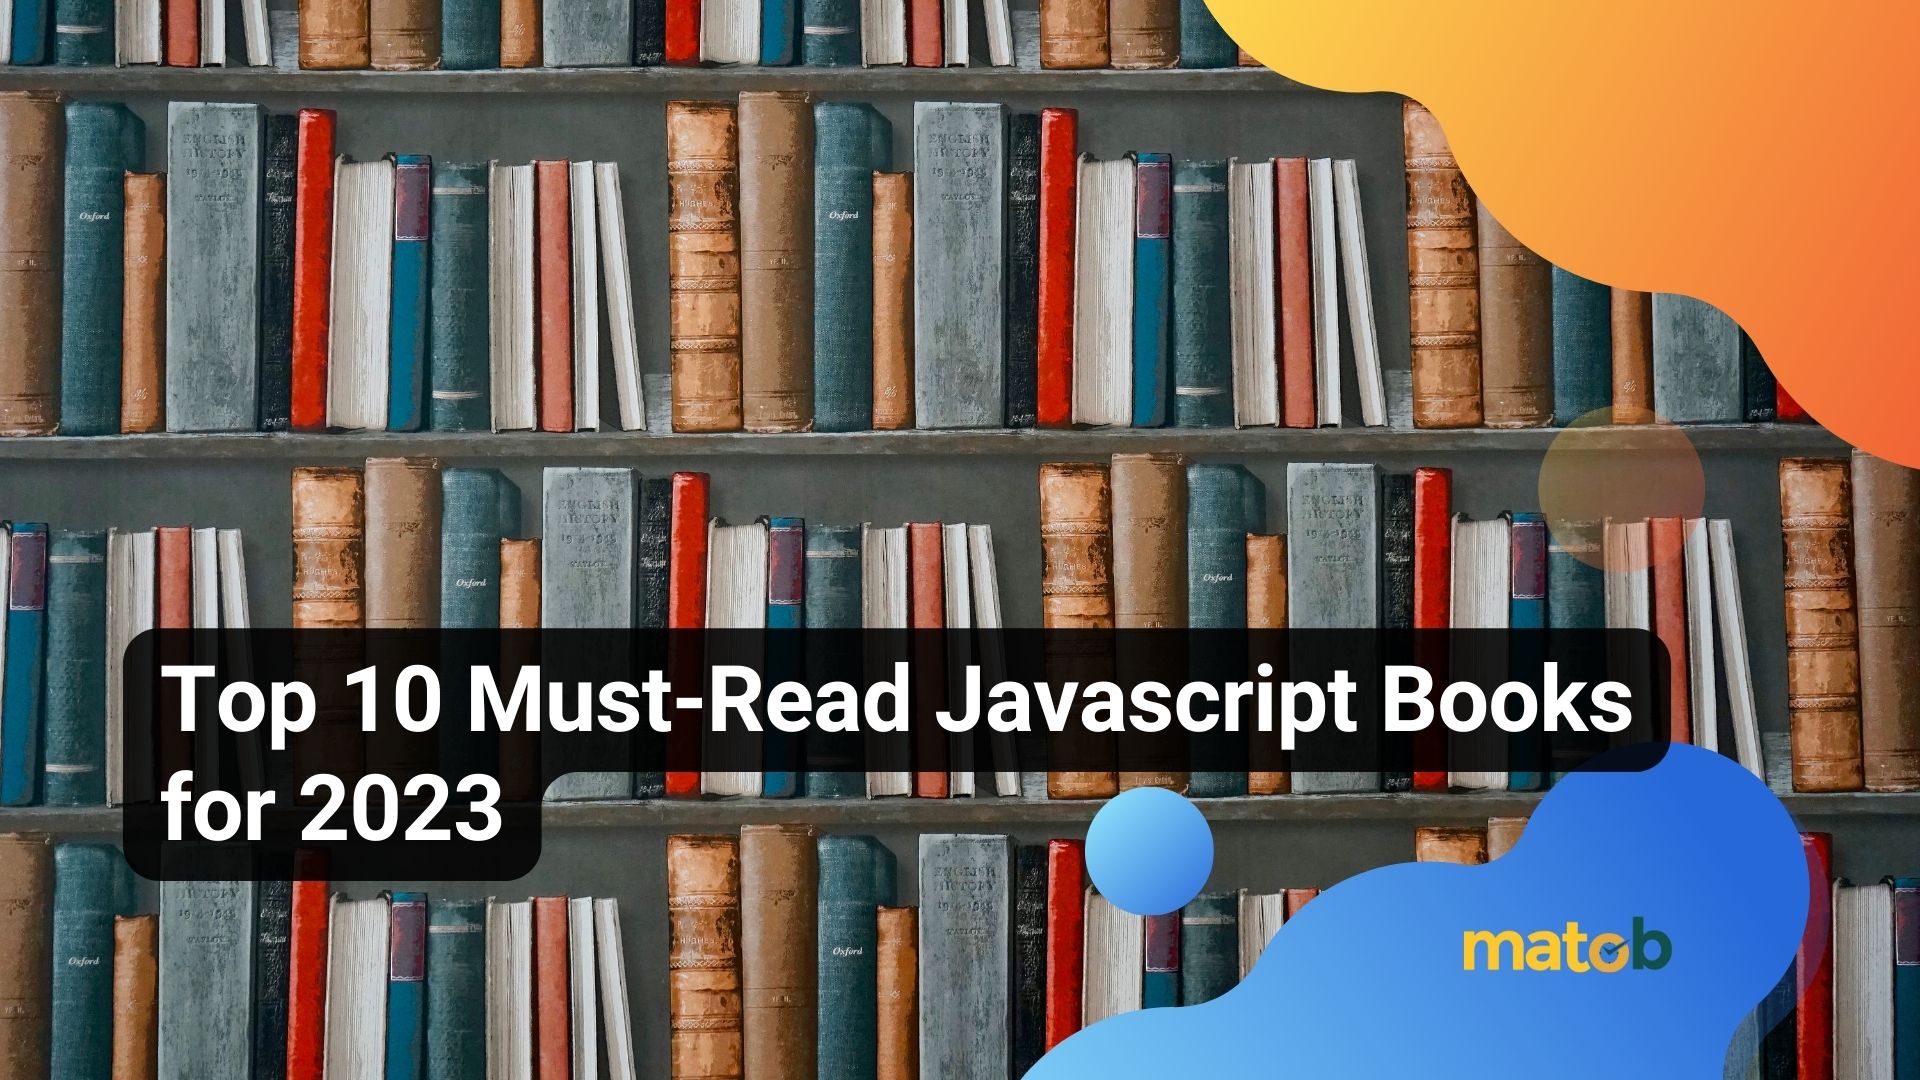 Top 10 Must-Read Javascript Books for 2023